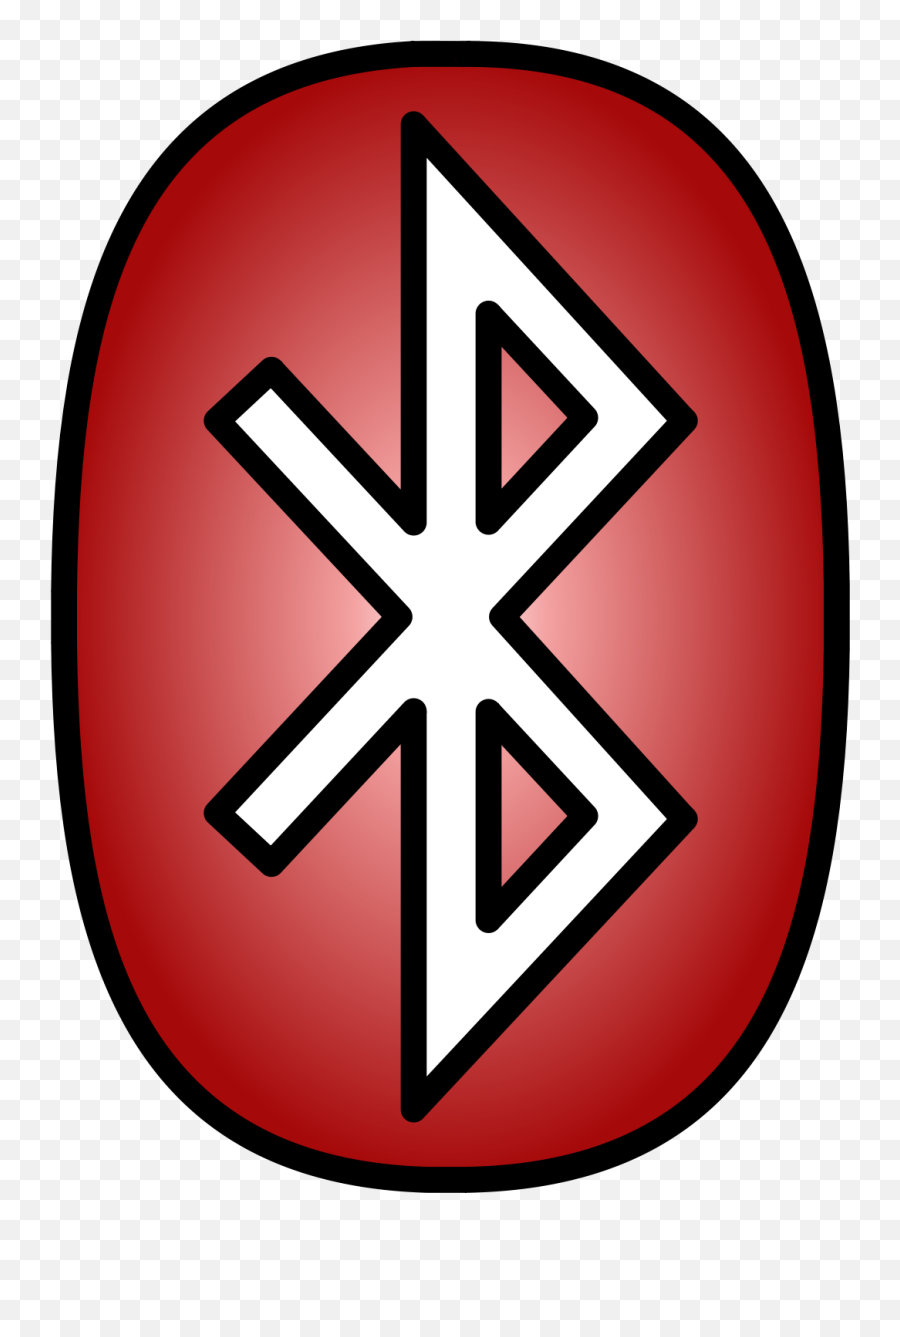 Download Bluetooth Logo Png - Icon,Bluetooth Logo Png